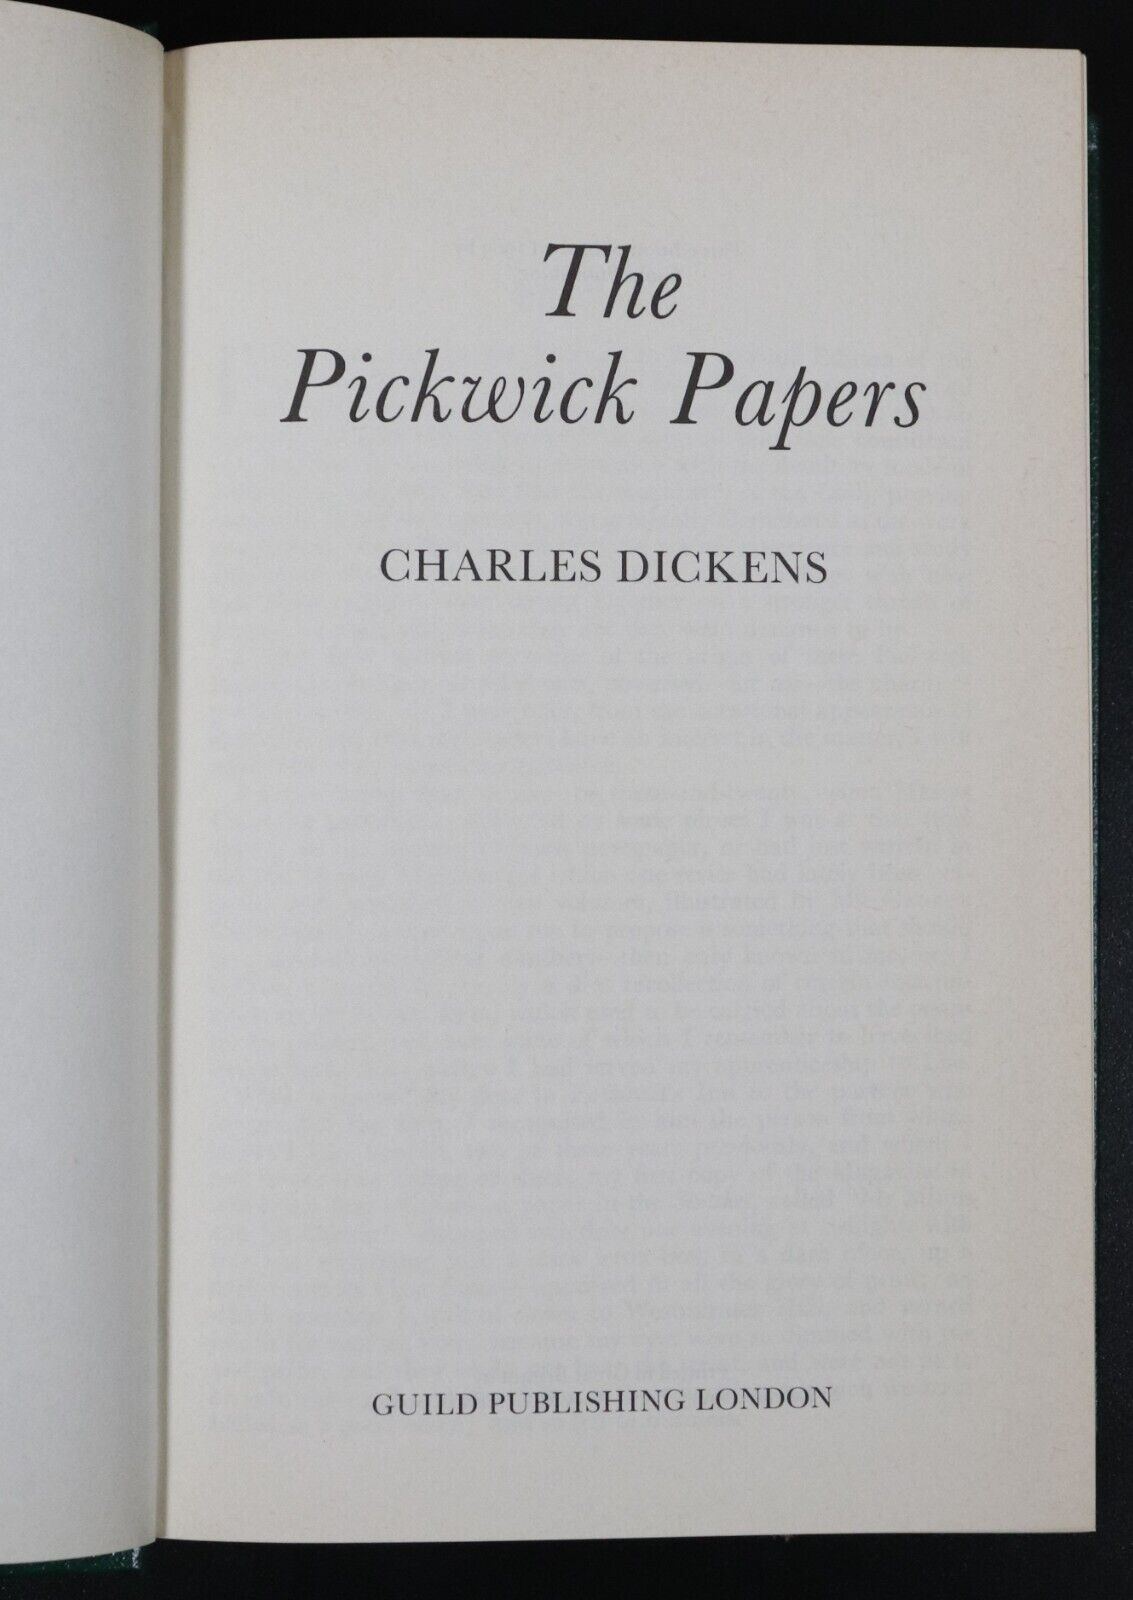 1983 2vol Pickwick Papers & Bleak House by Charles Dickens Classic Fiction Books - 0